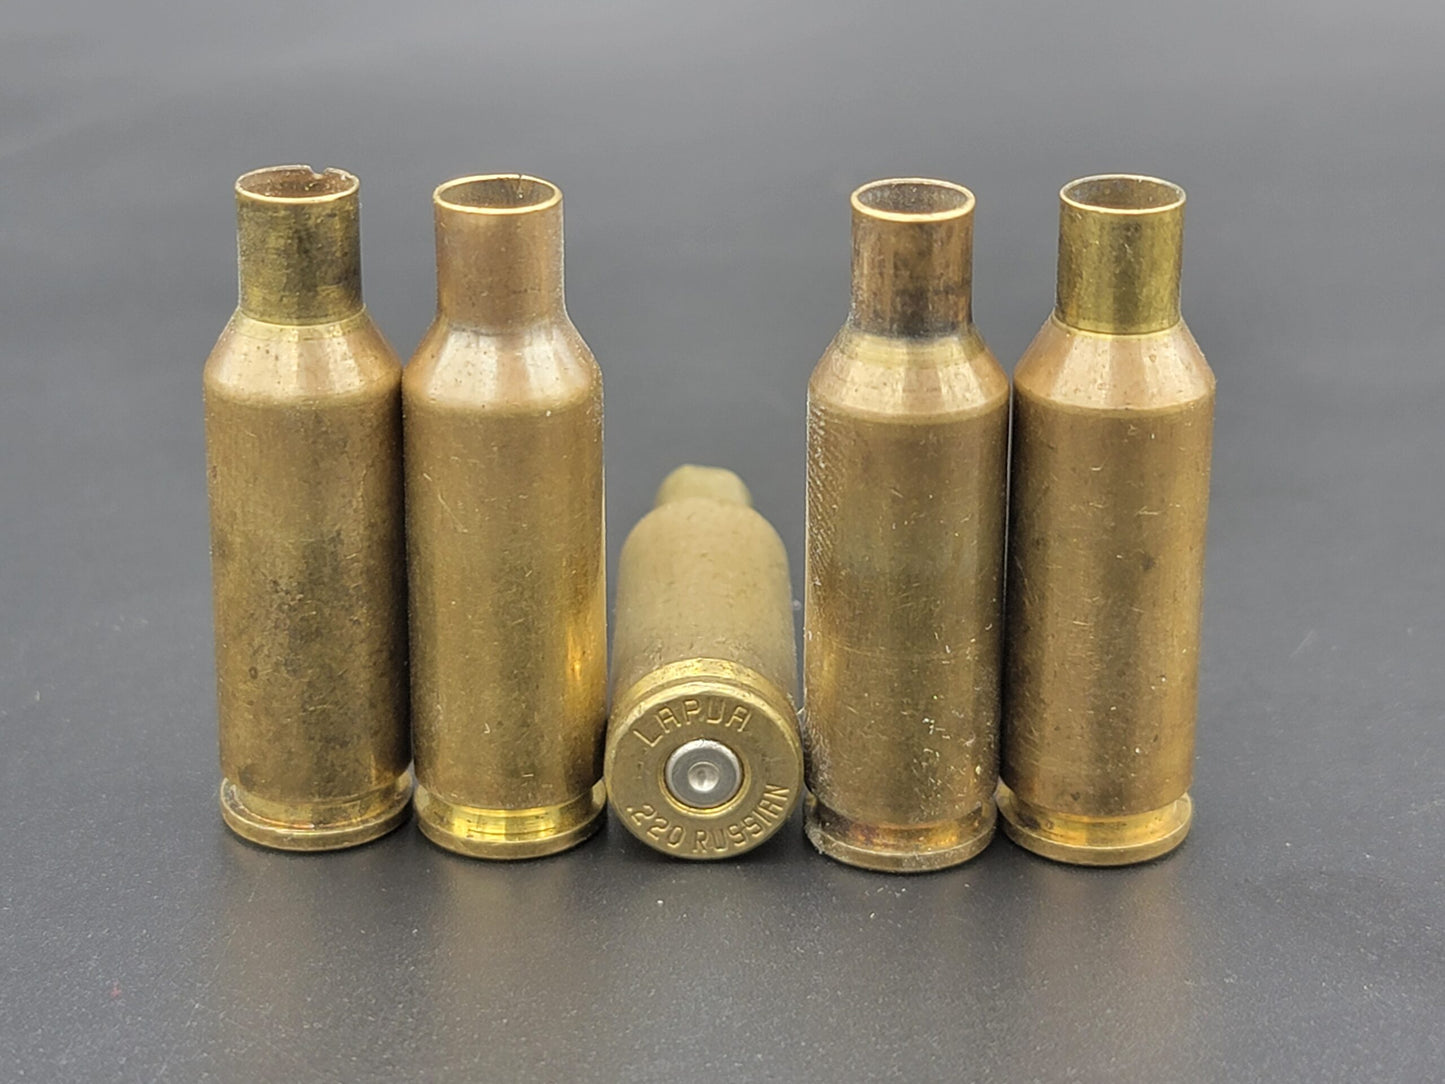 220 Russian once fired rifle brass. Hand sorted from reputable indoor/military ranges for reloading. Reliable spent casings for precision shooting.